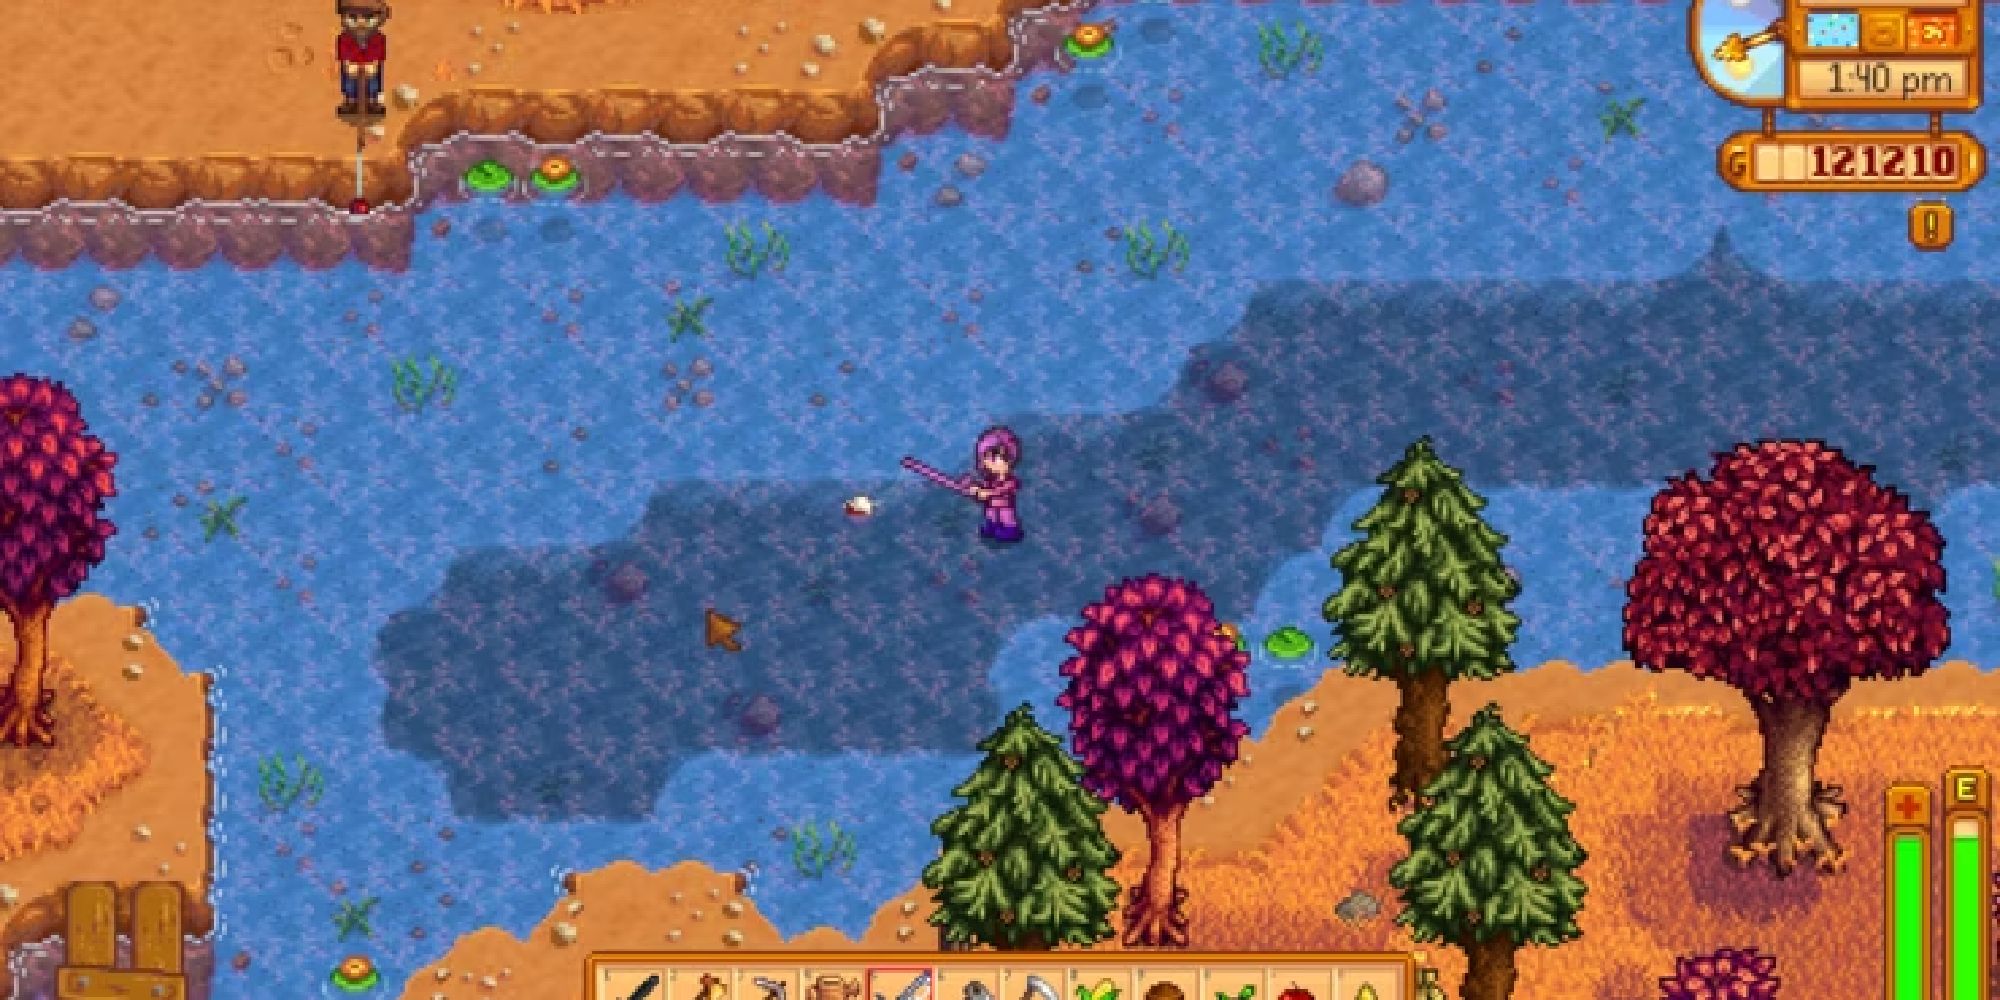 Stardew Valley Player Fishing Out Of Bounds In The River During Fall